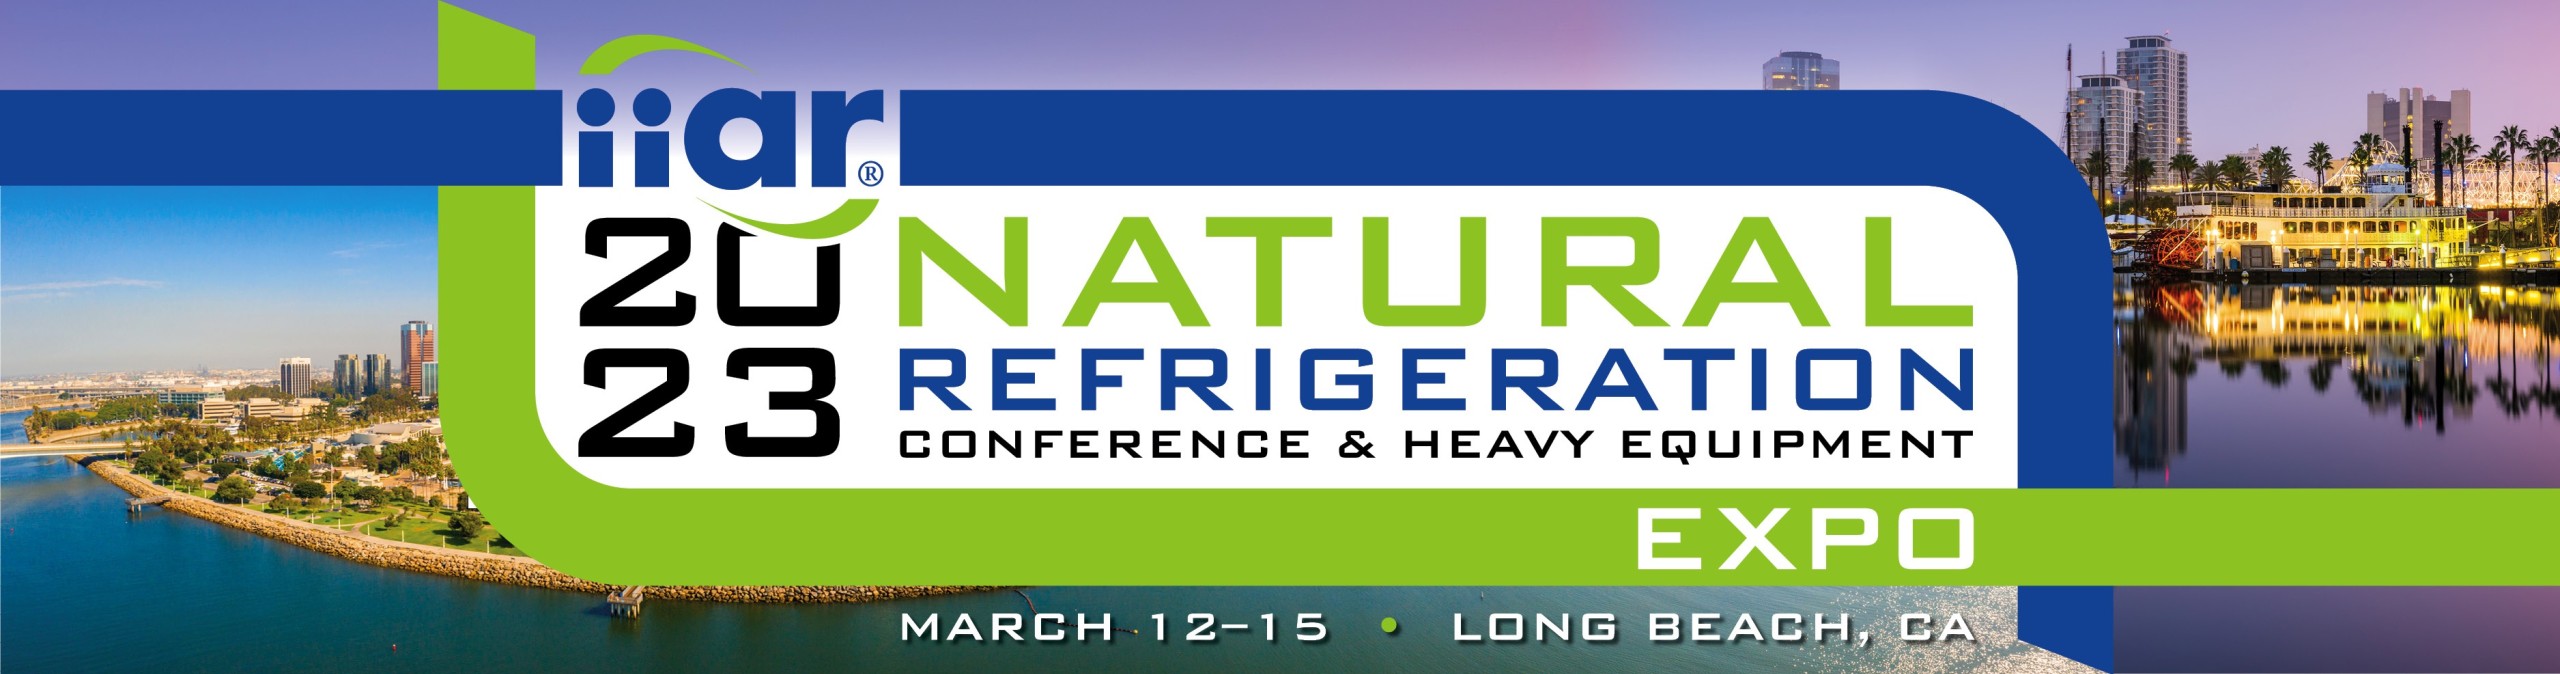 IIAR 2023 NATURAL REFRIGERATION CONFERENCE & HEAVY EQUIPMENT EXPO